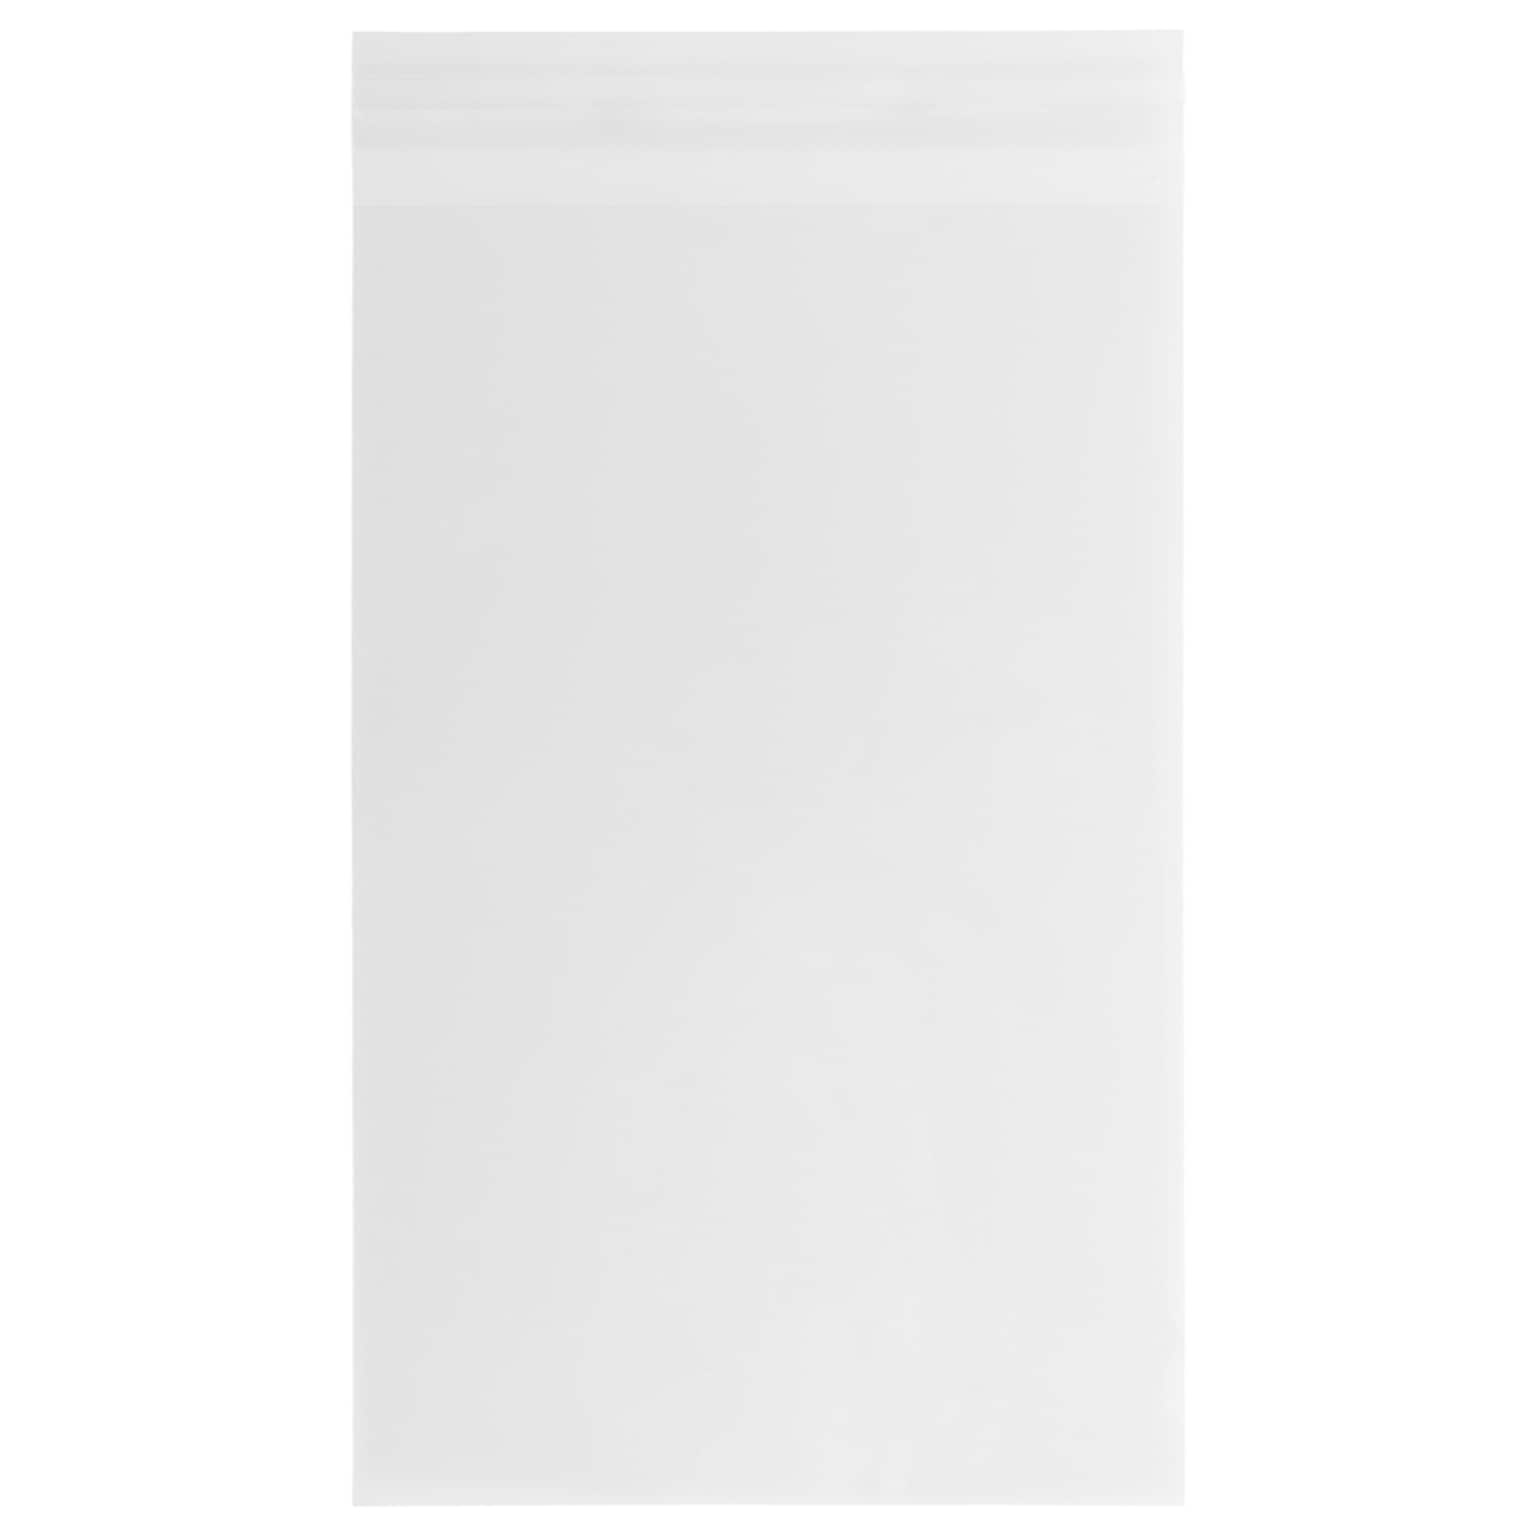 JAM Paper Cello Sleeves with Peel & Seal Closure, 5.9375 x 8.875, Clear, 1000/Carton (A9CELLOB)